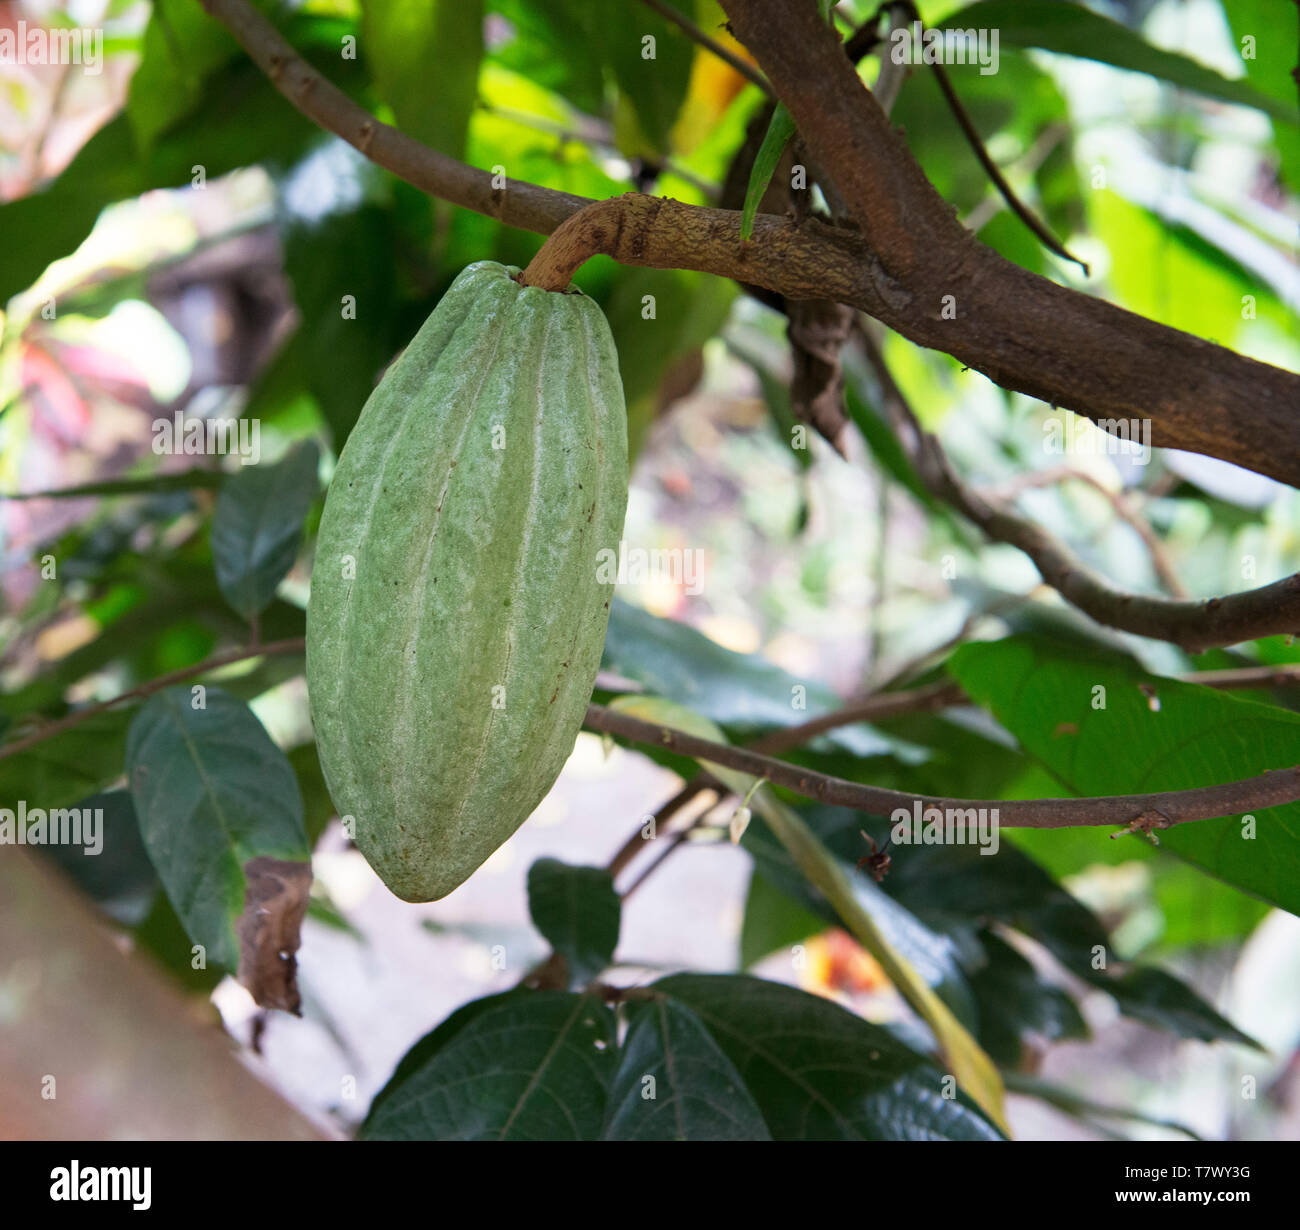 The rare cacao pod for exclusive chocolate in Mindo Ecuador, on the tree and inside, makes the best chocolate Stock Photo